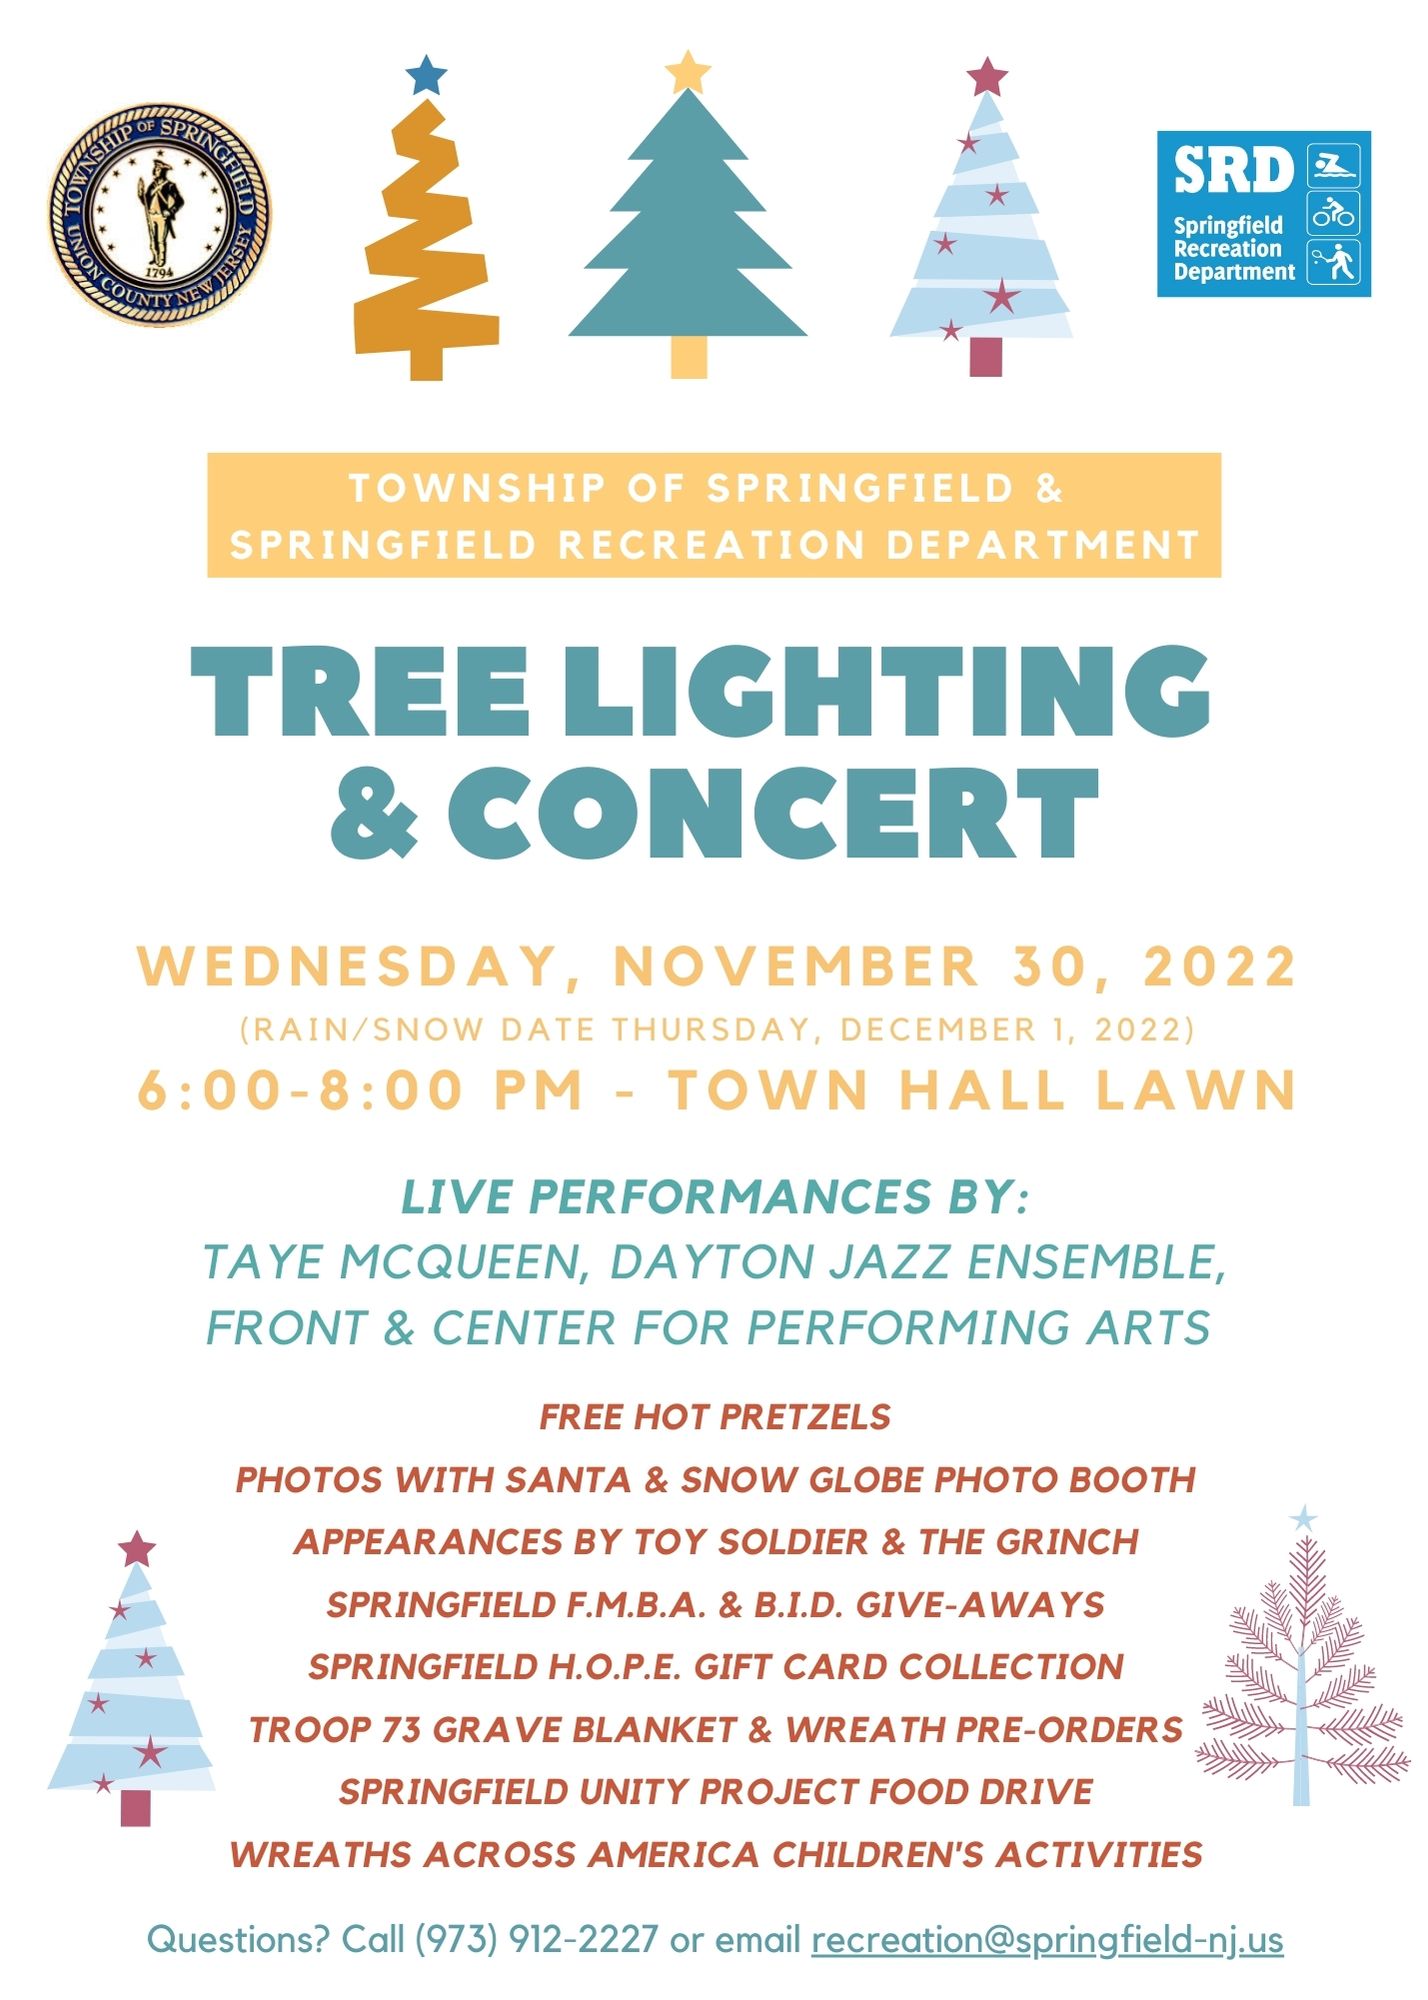 2022 Tree Lighting Features Live Concert By Local Performers